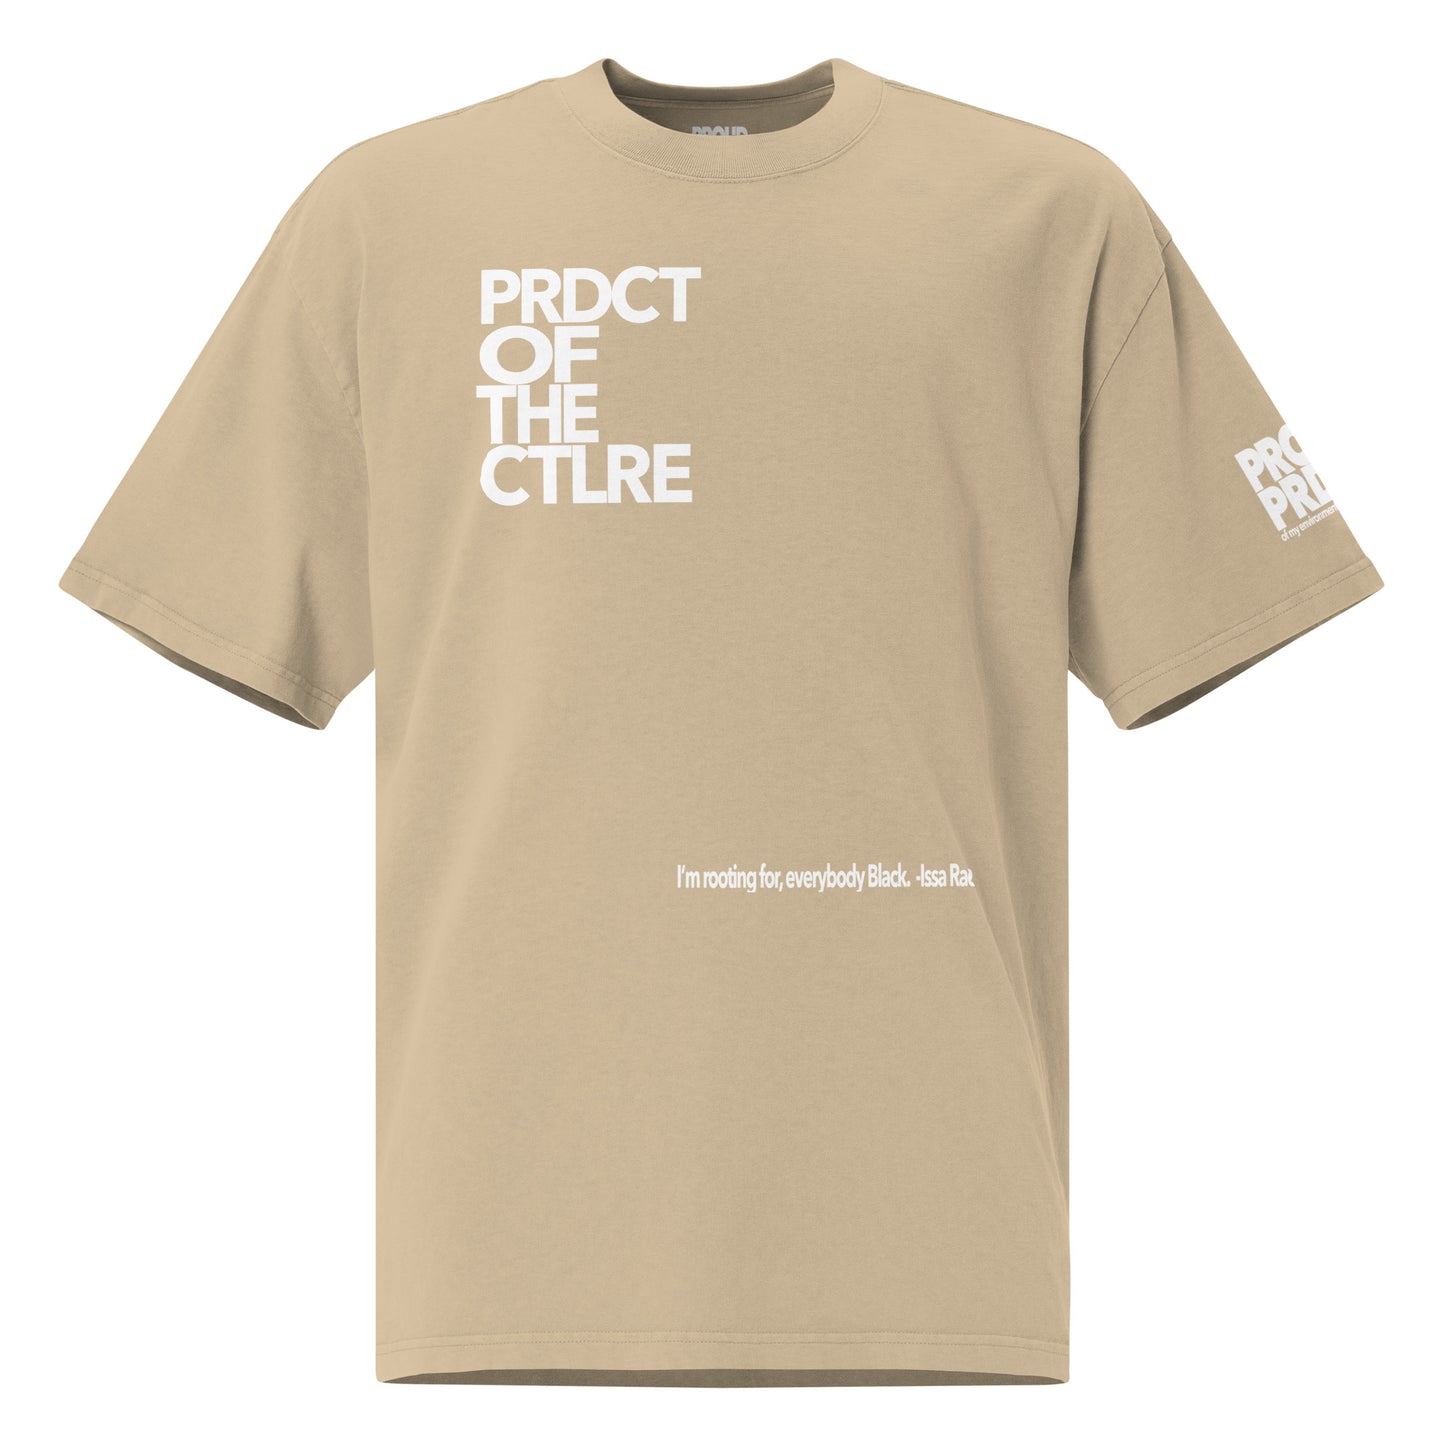 "Product of the Culture" Oversized t-shirt